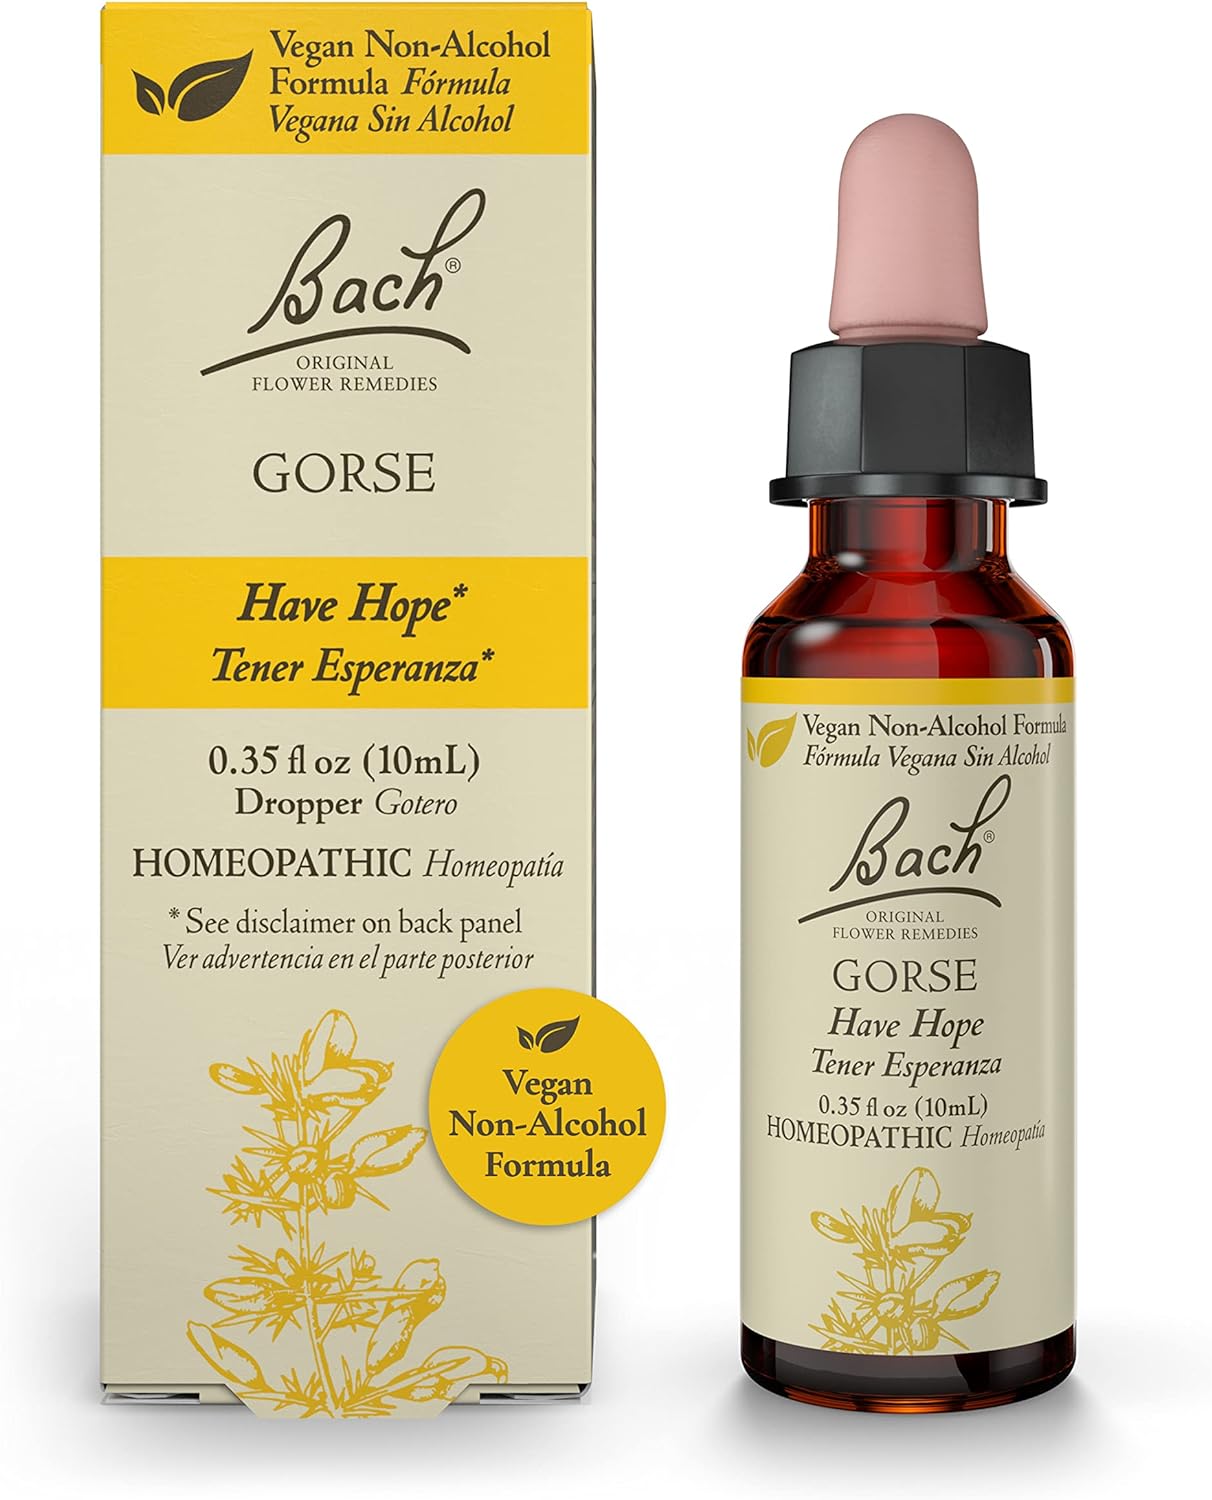 Bach Original Flower Remedies, Gorse for Hope (Non-Alcohol Formula), Natural Homeopathic Flower Essence, Holistic Wellness and Stress Relief, Vegan, 10mL Dropper